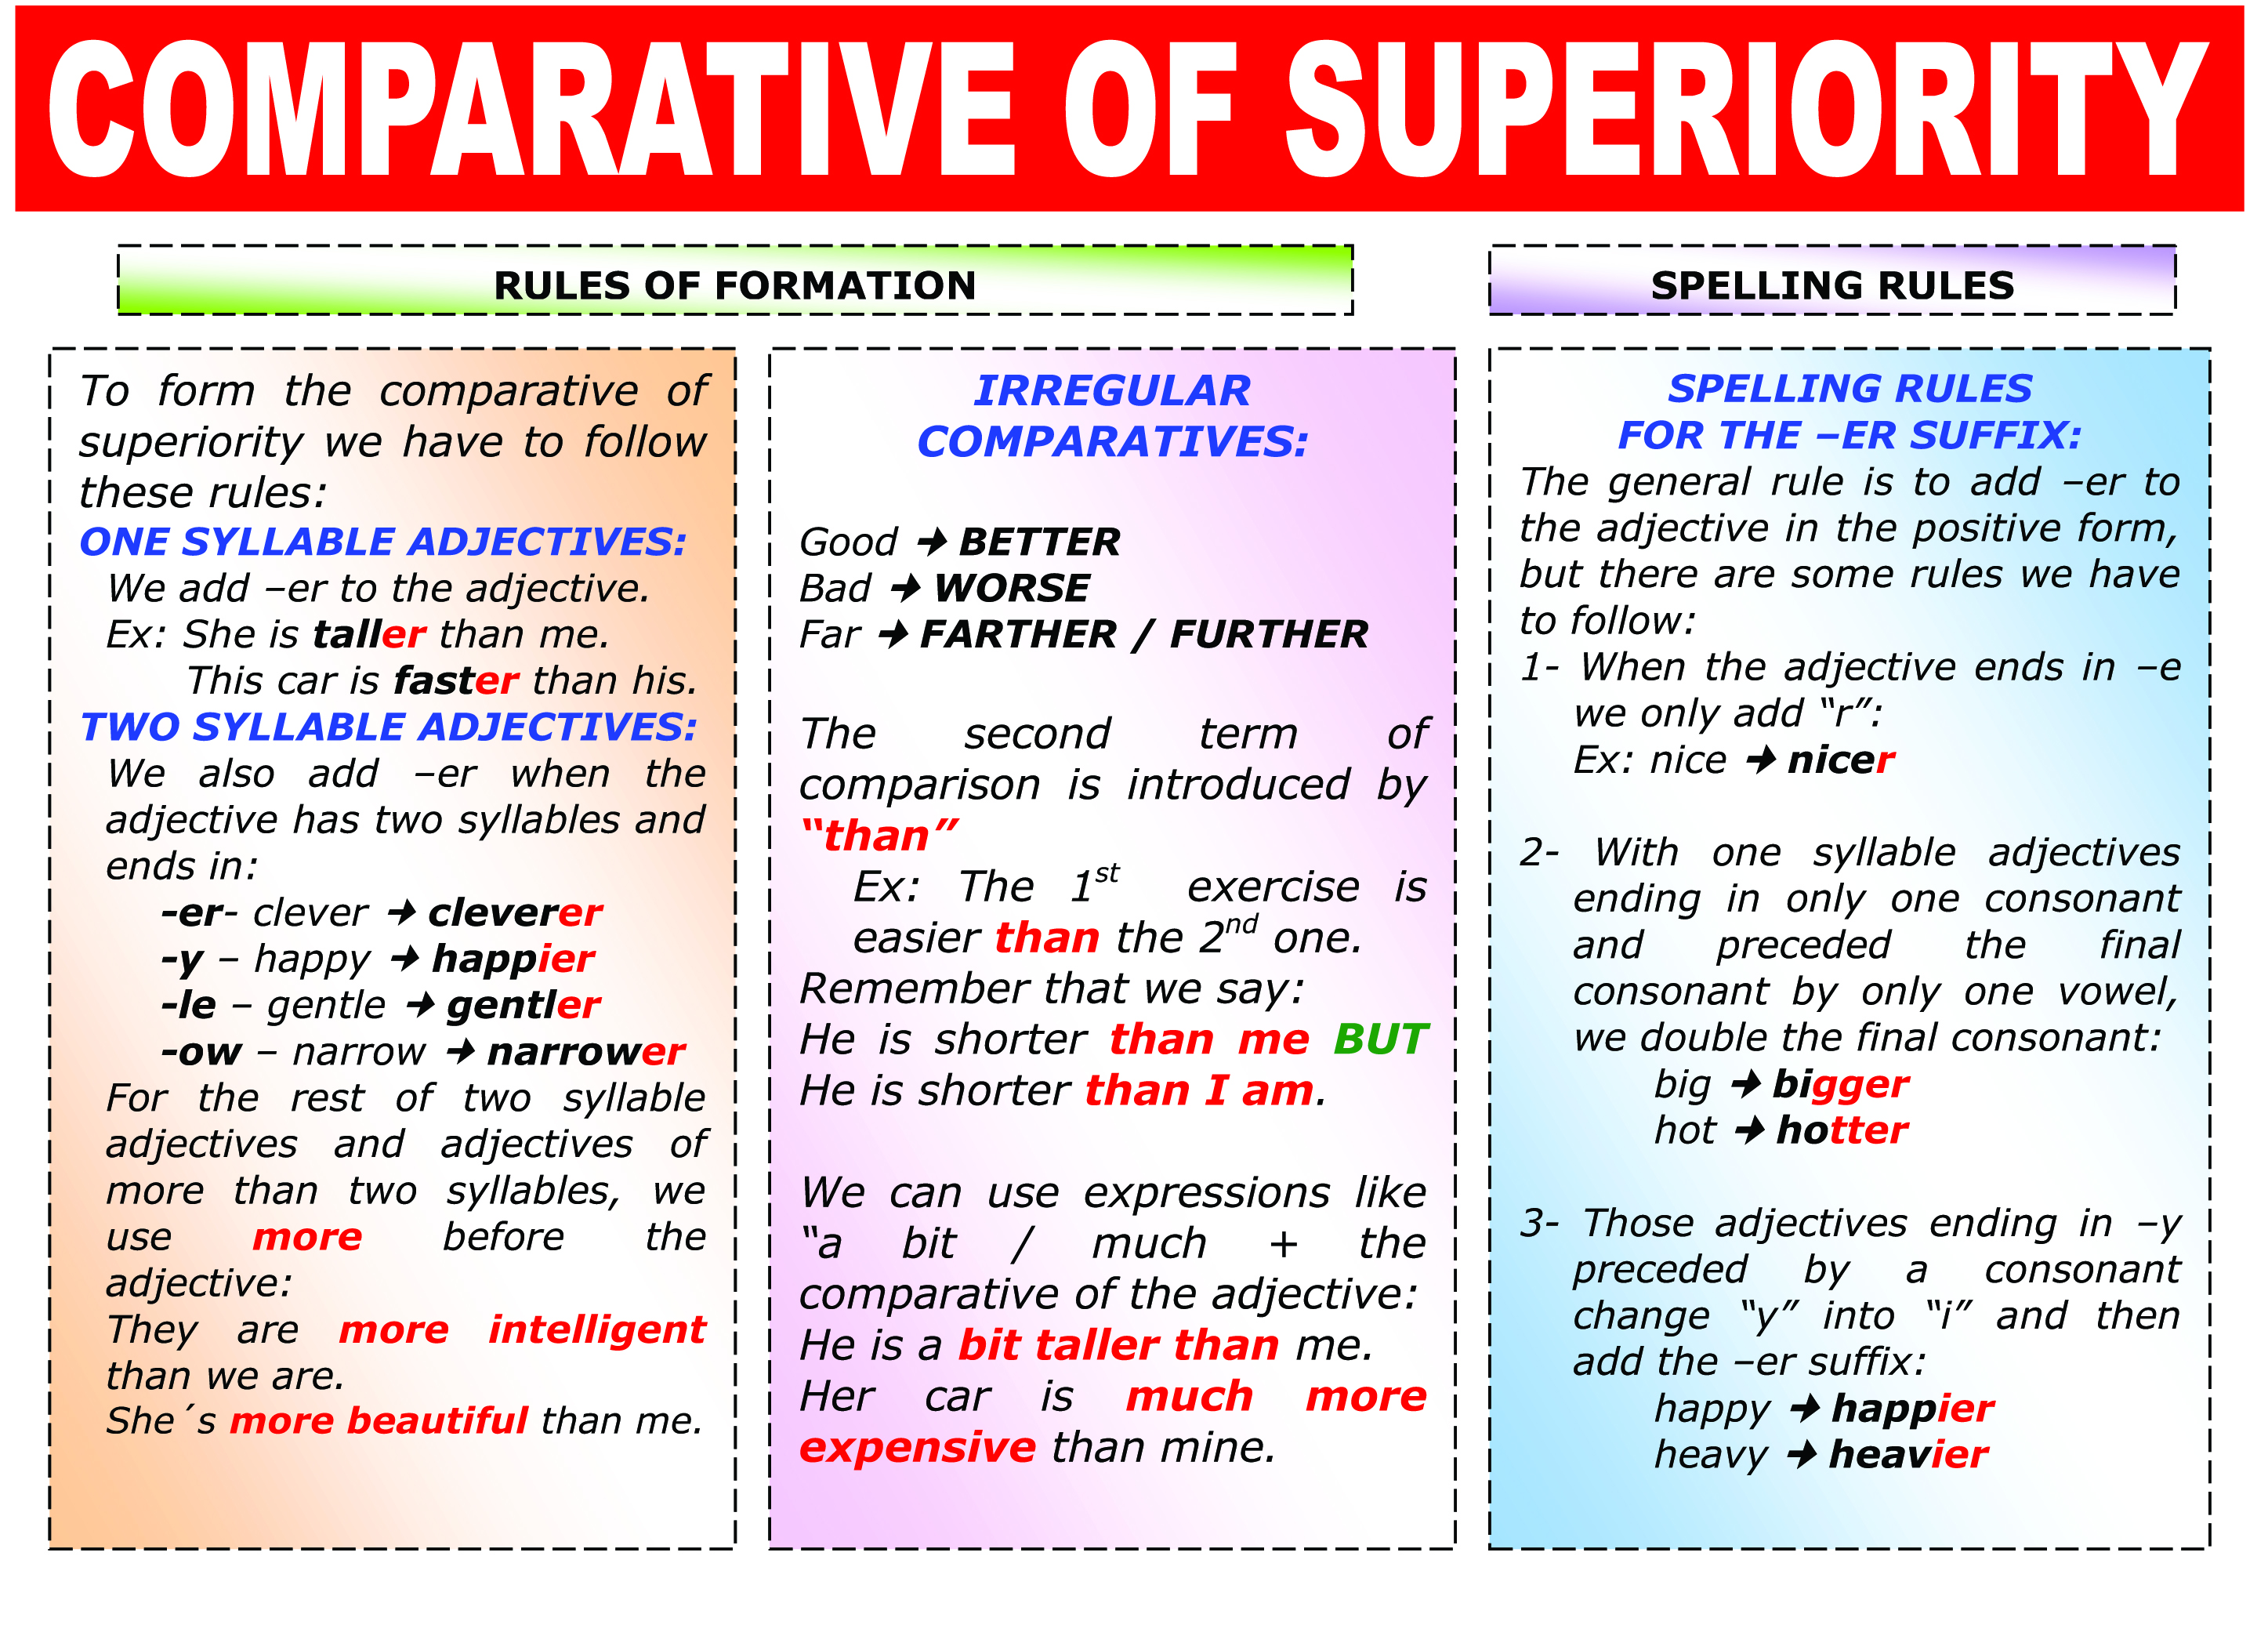 Comparisons heavy. Comparative of superiority. Comparisons правило. Comparative adjectives Rule. Spelling Rules adjectives.